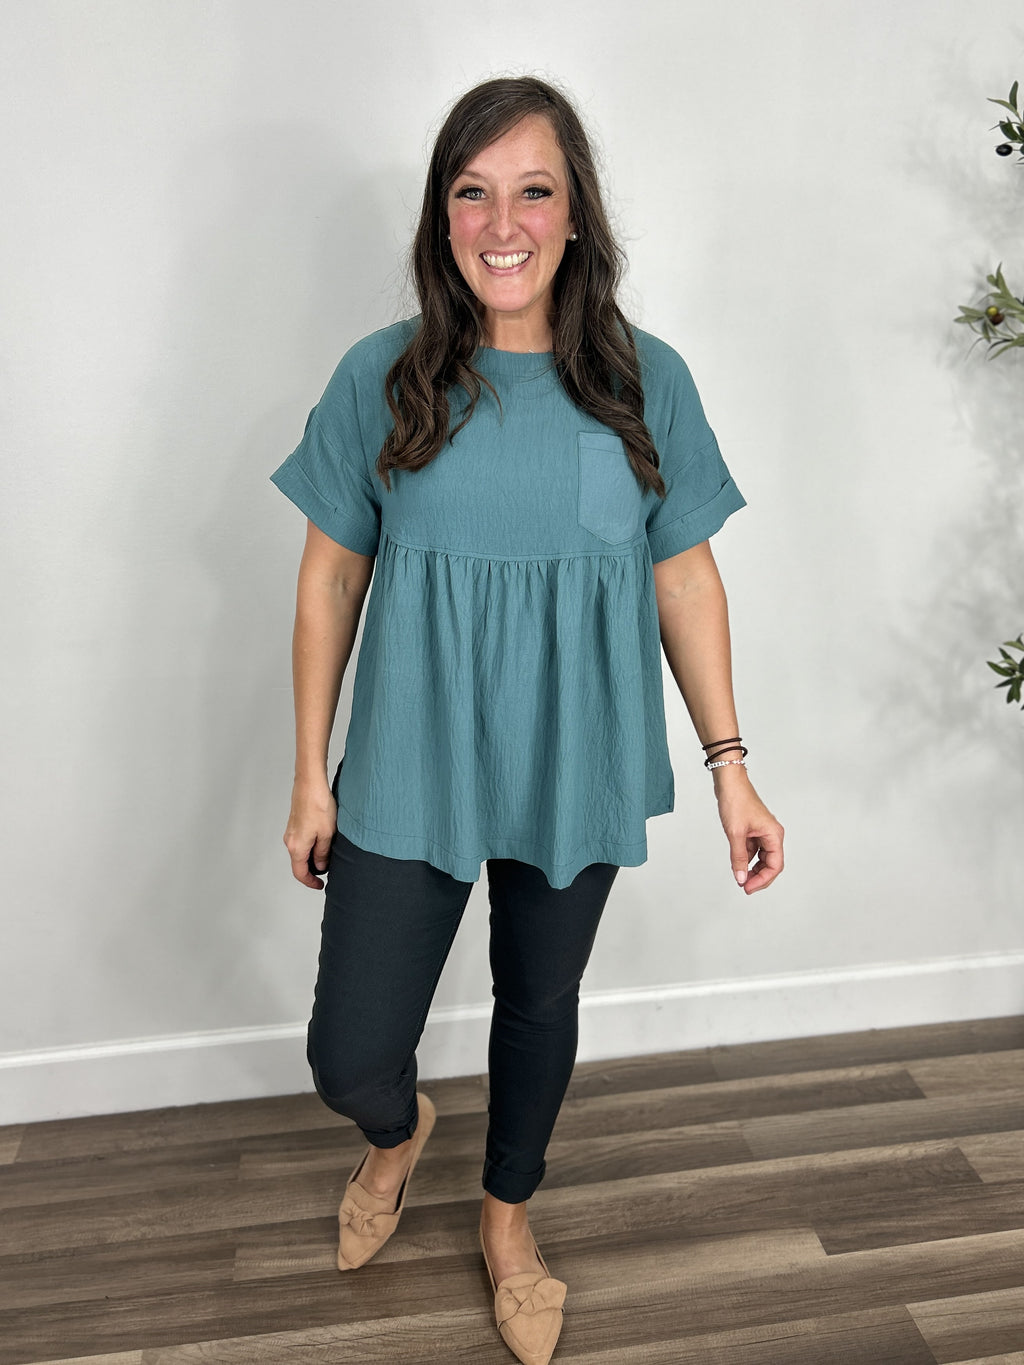 Women's teal short sleeve babydoll top paired with charcoal skinny jeans and camel color slip on shoes.